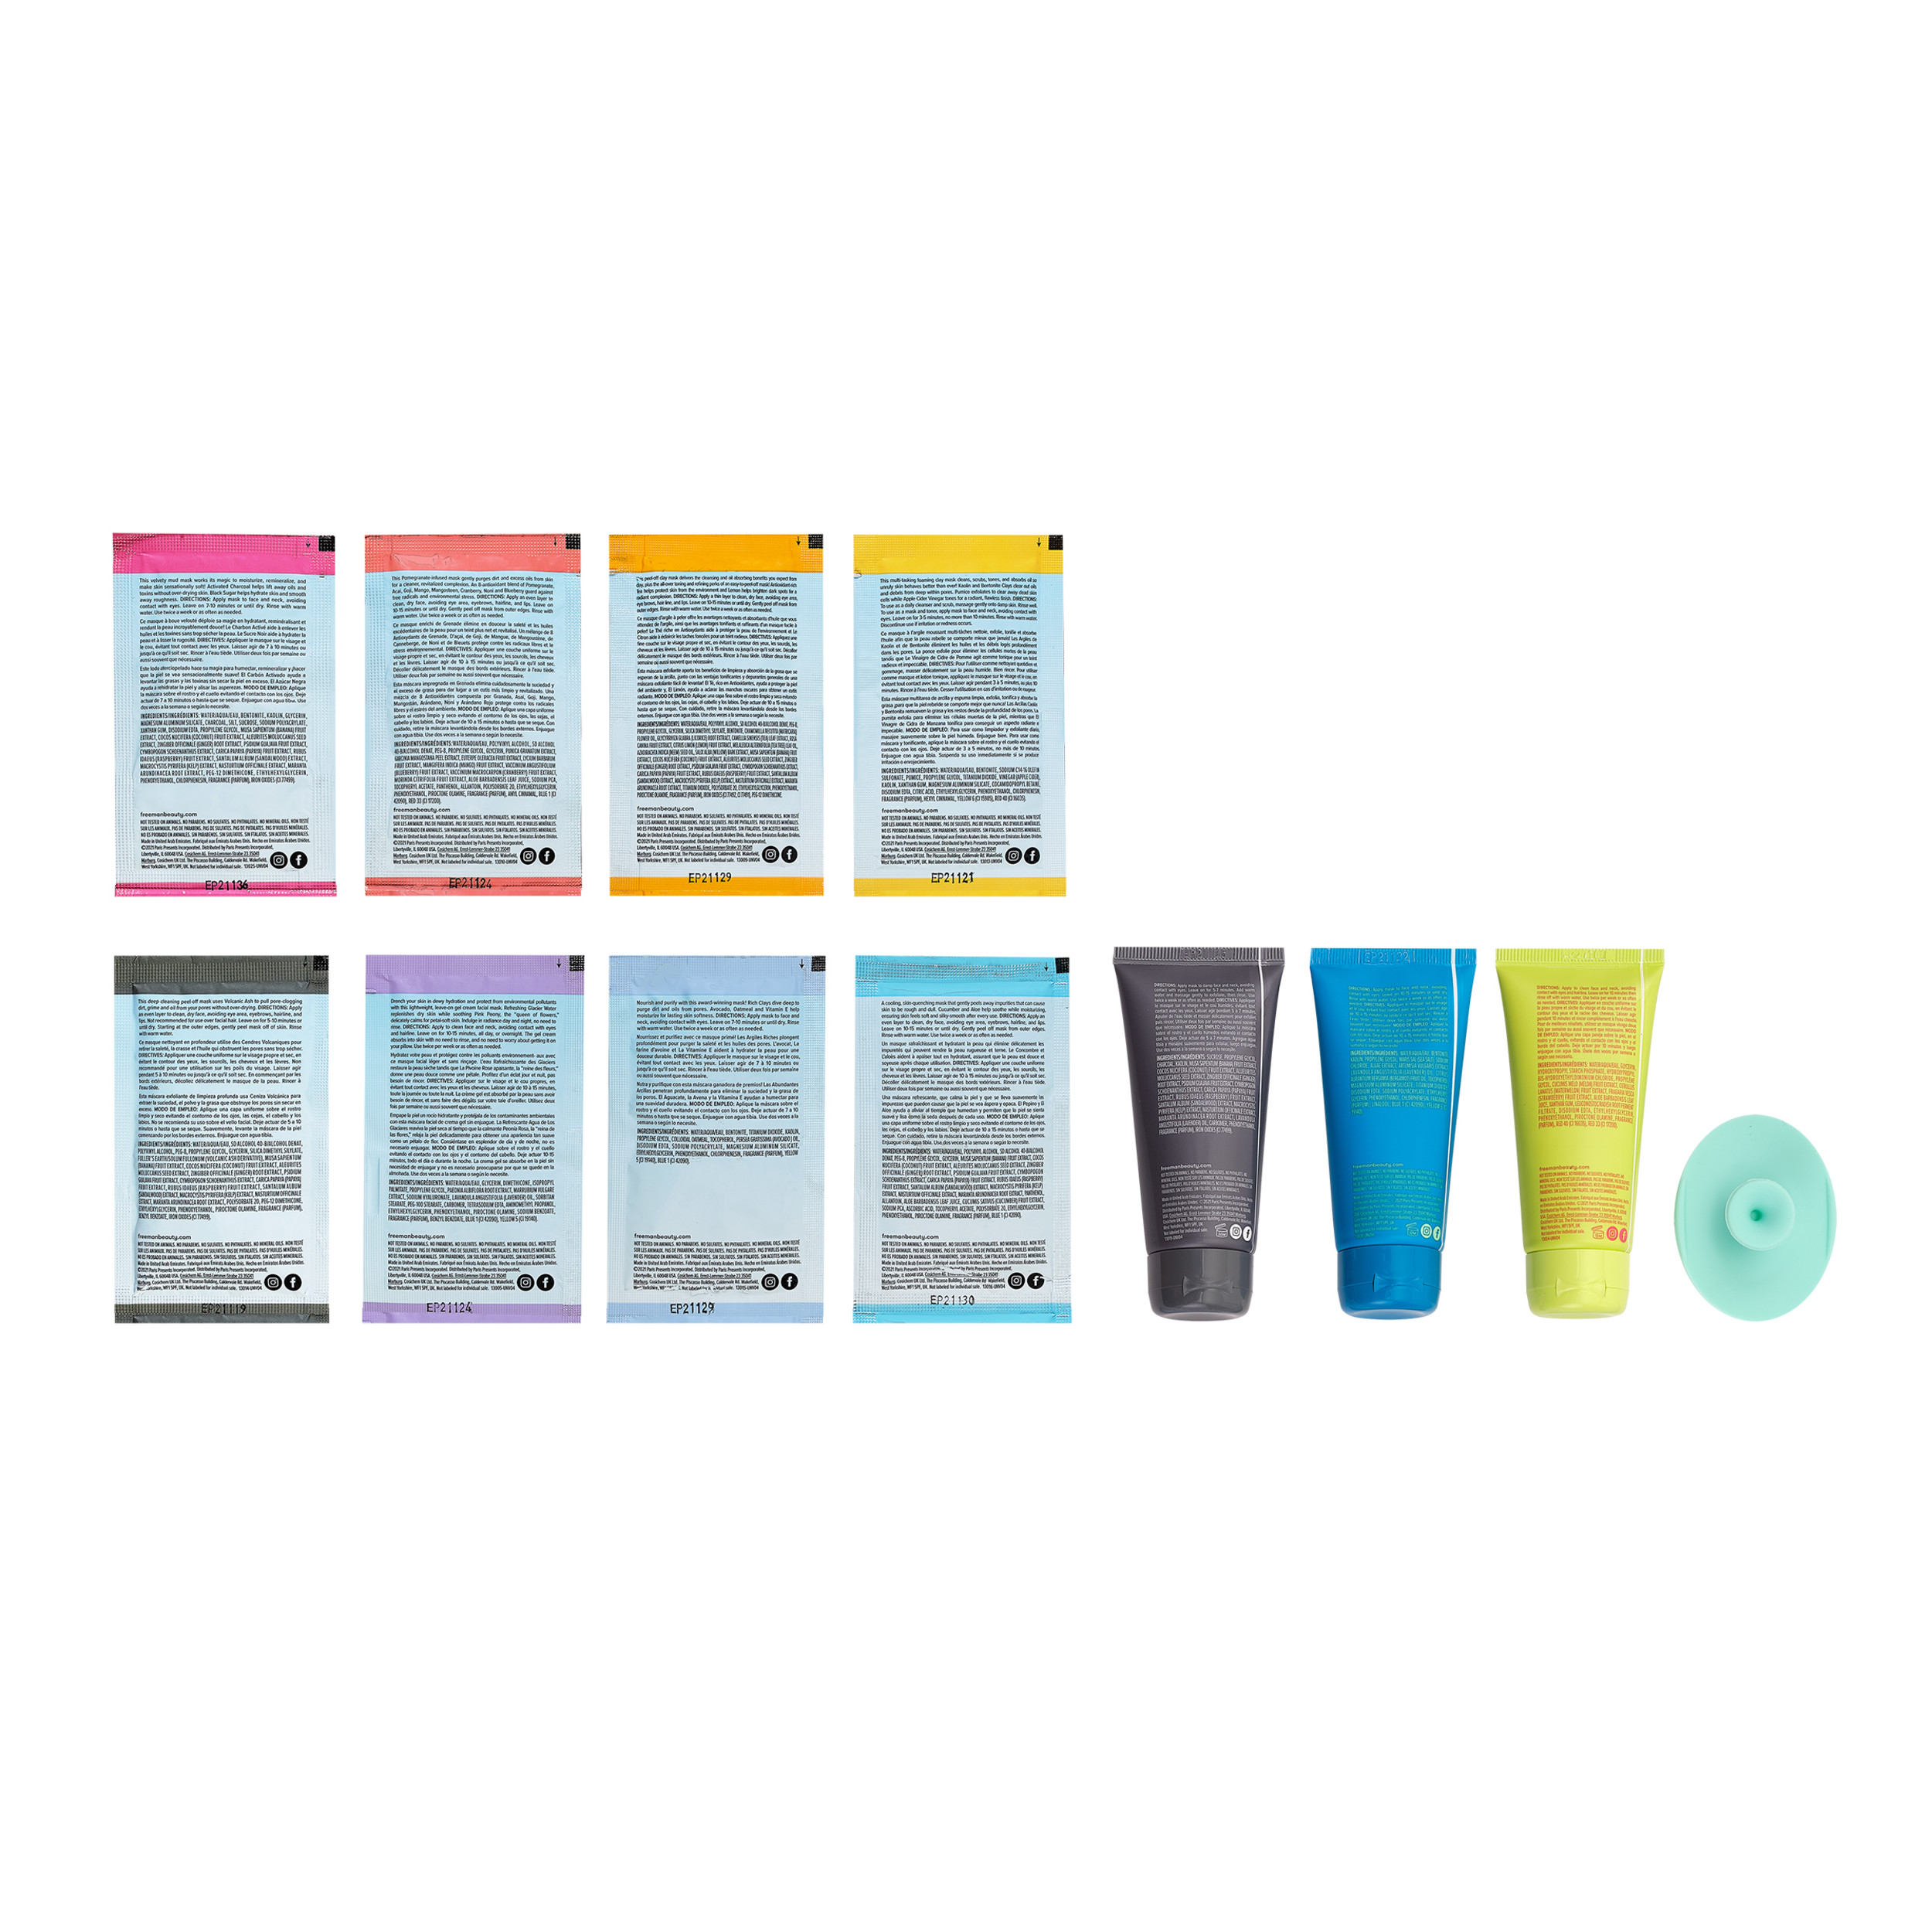 Freeman Limited Edition Renew & Relax Facial Mask Kit, 12 Piece Gift Set - image 4 of 24